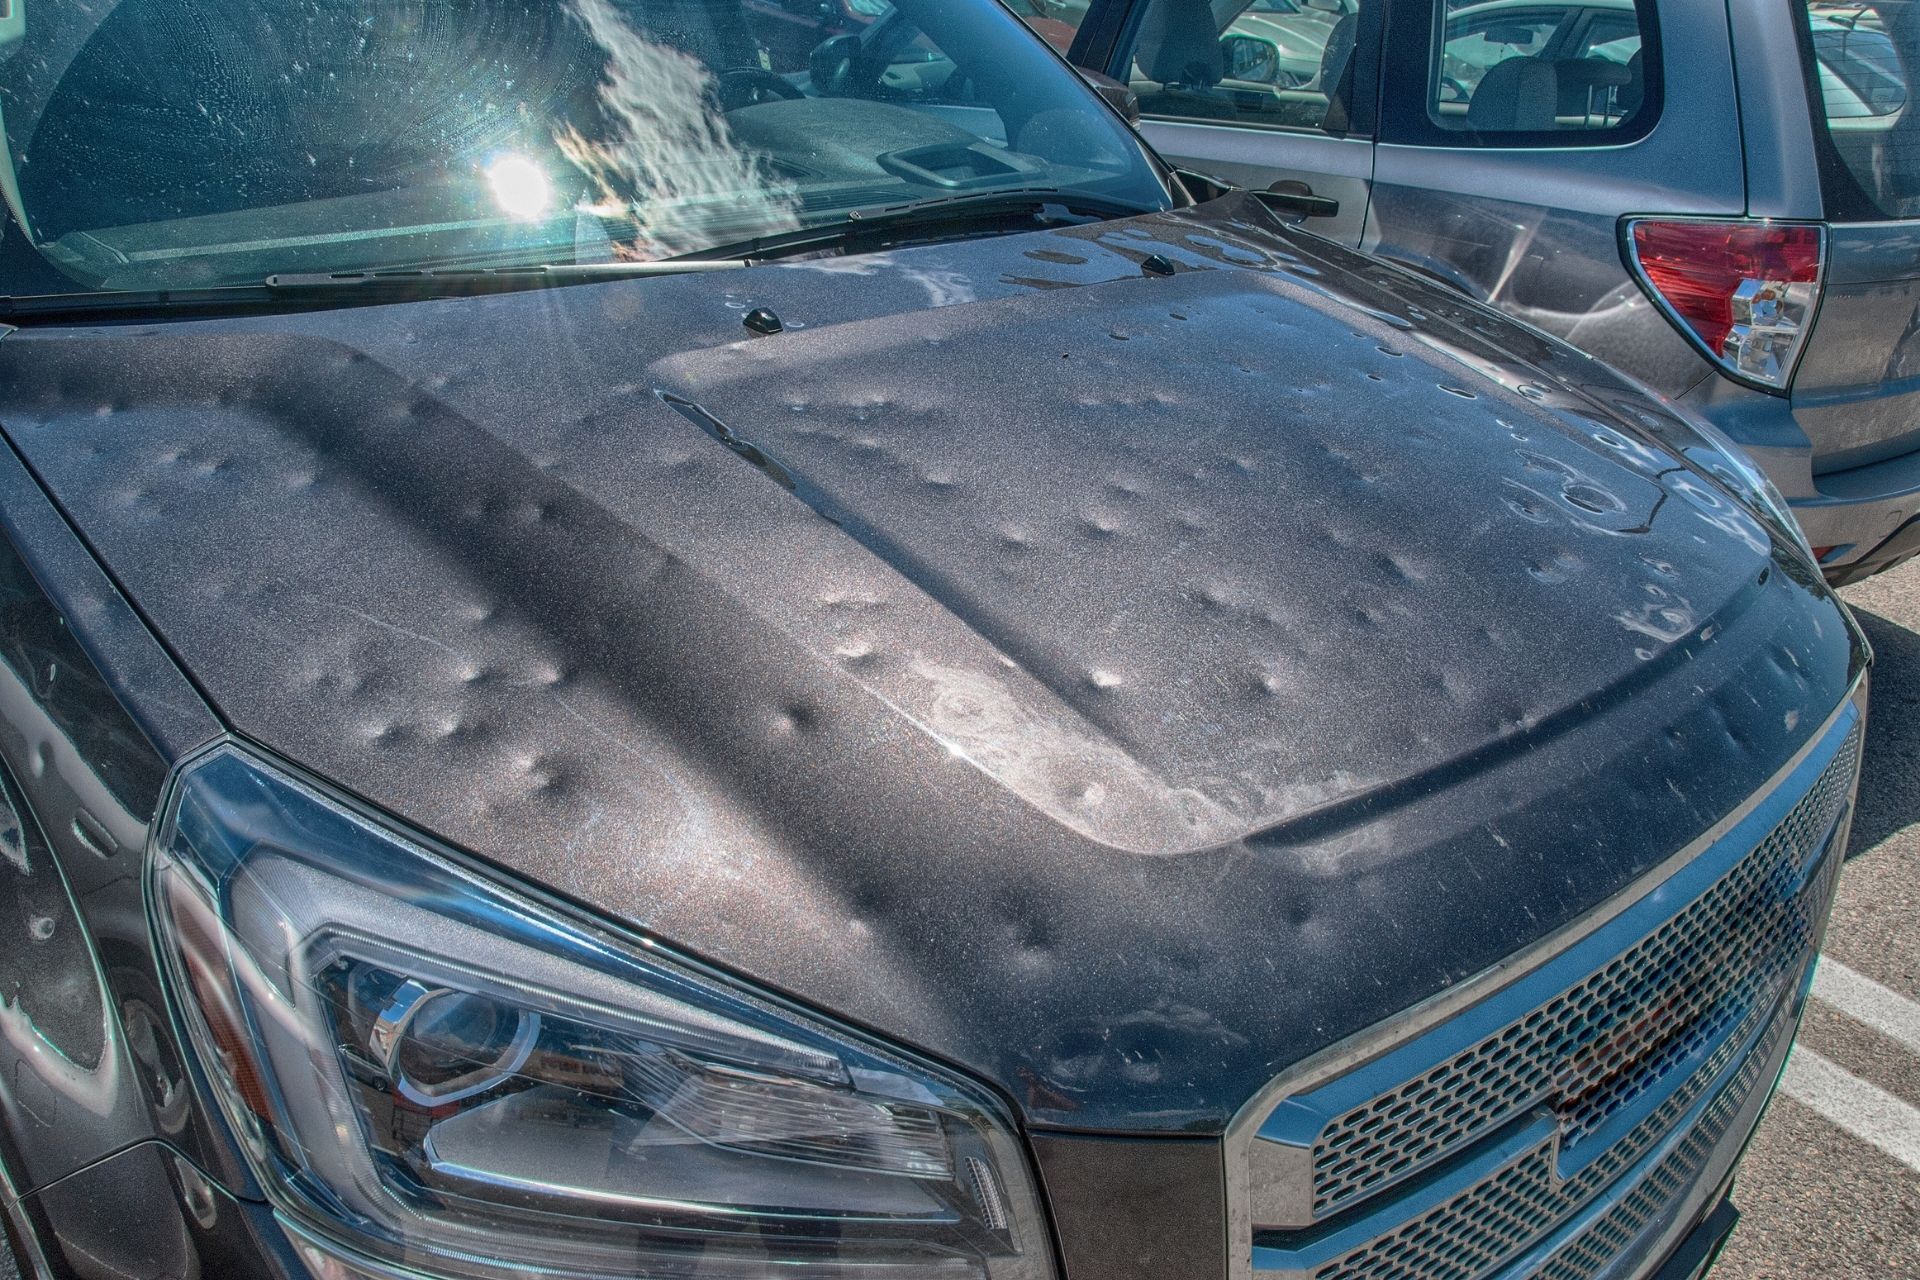 5 Things To Know Before Filing an Auto Hail Damage Claim